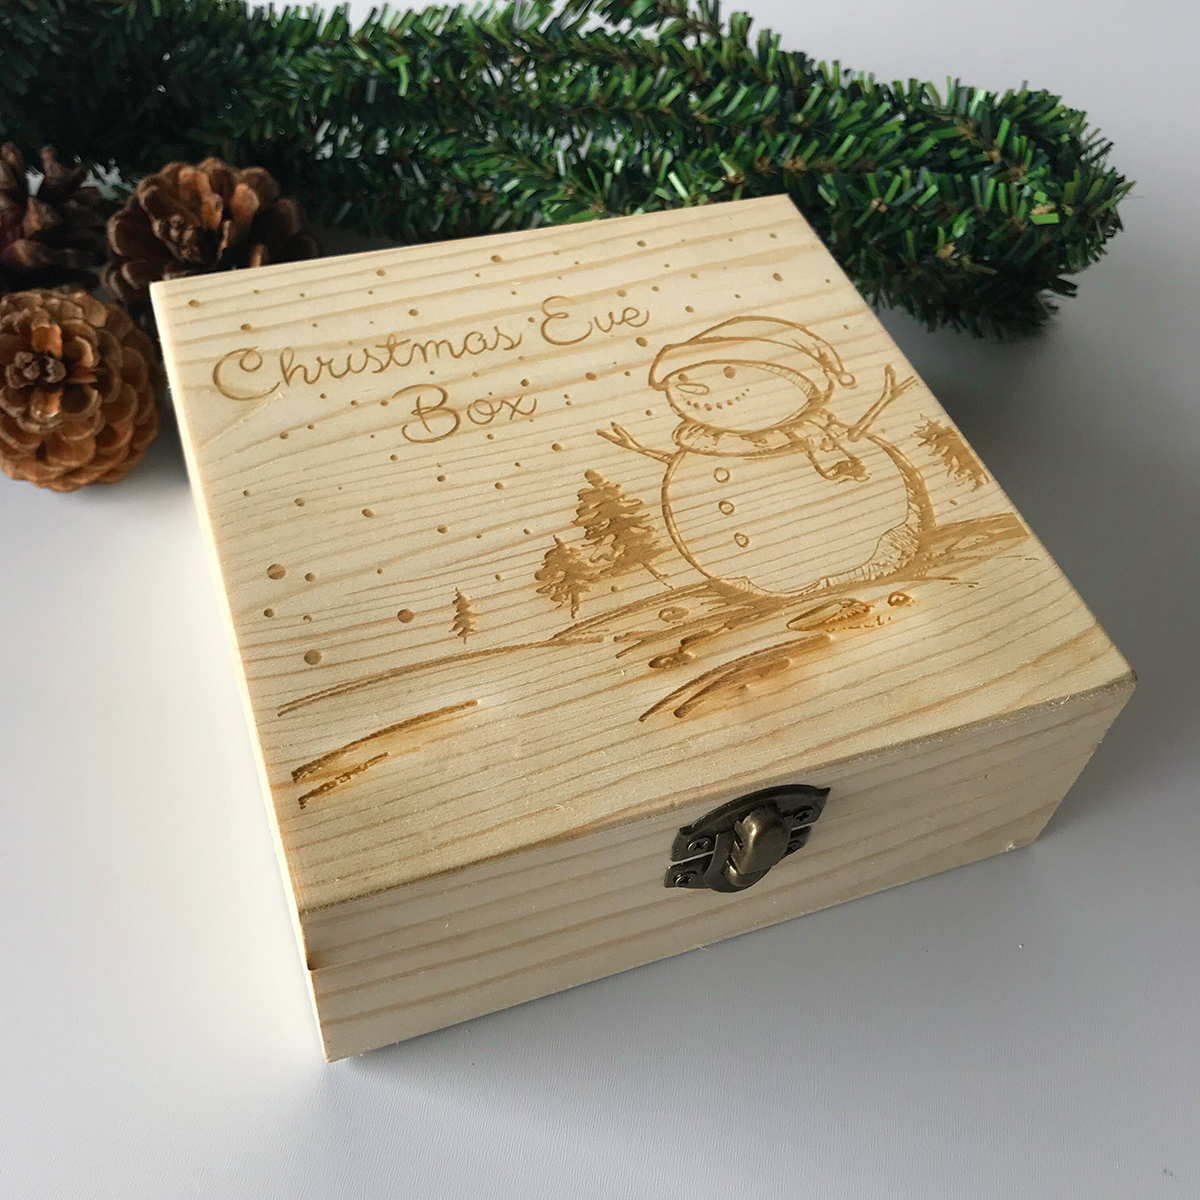 Wooden-Decoration-Toys-Gift-Box-Christmas-Snowman-Painting-1399011-2